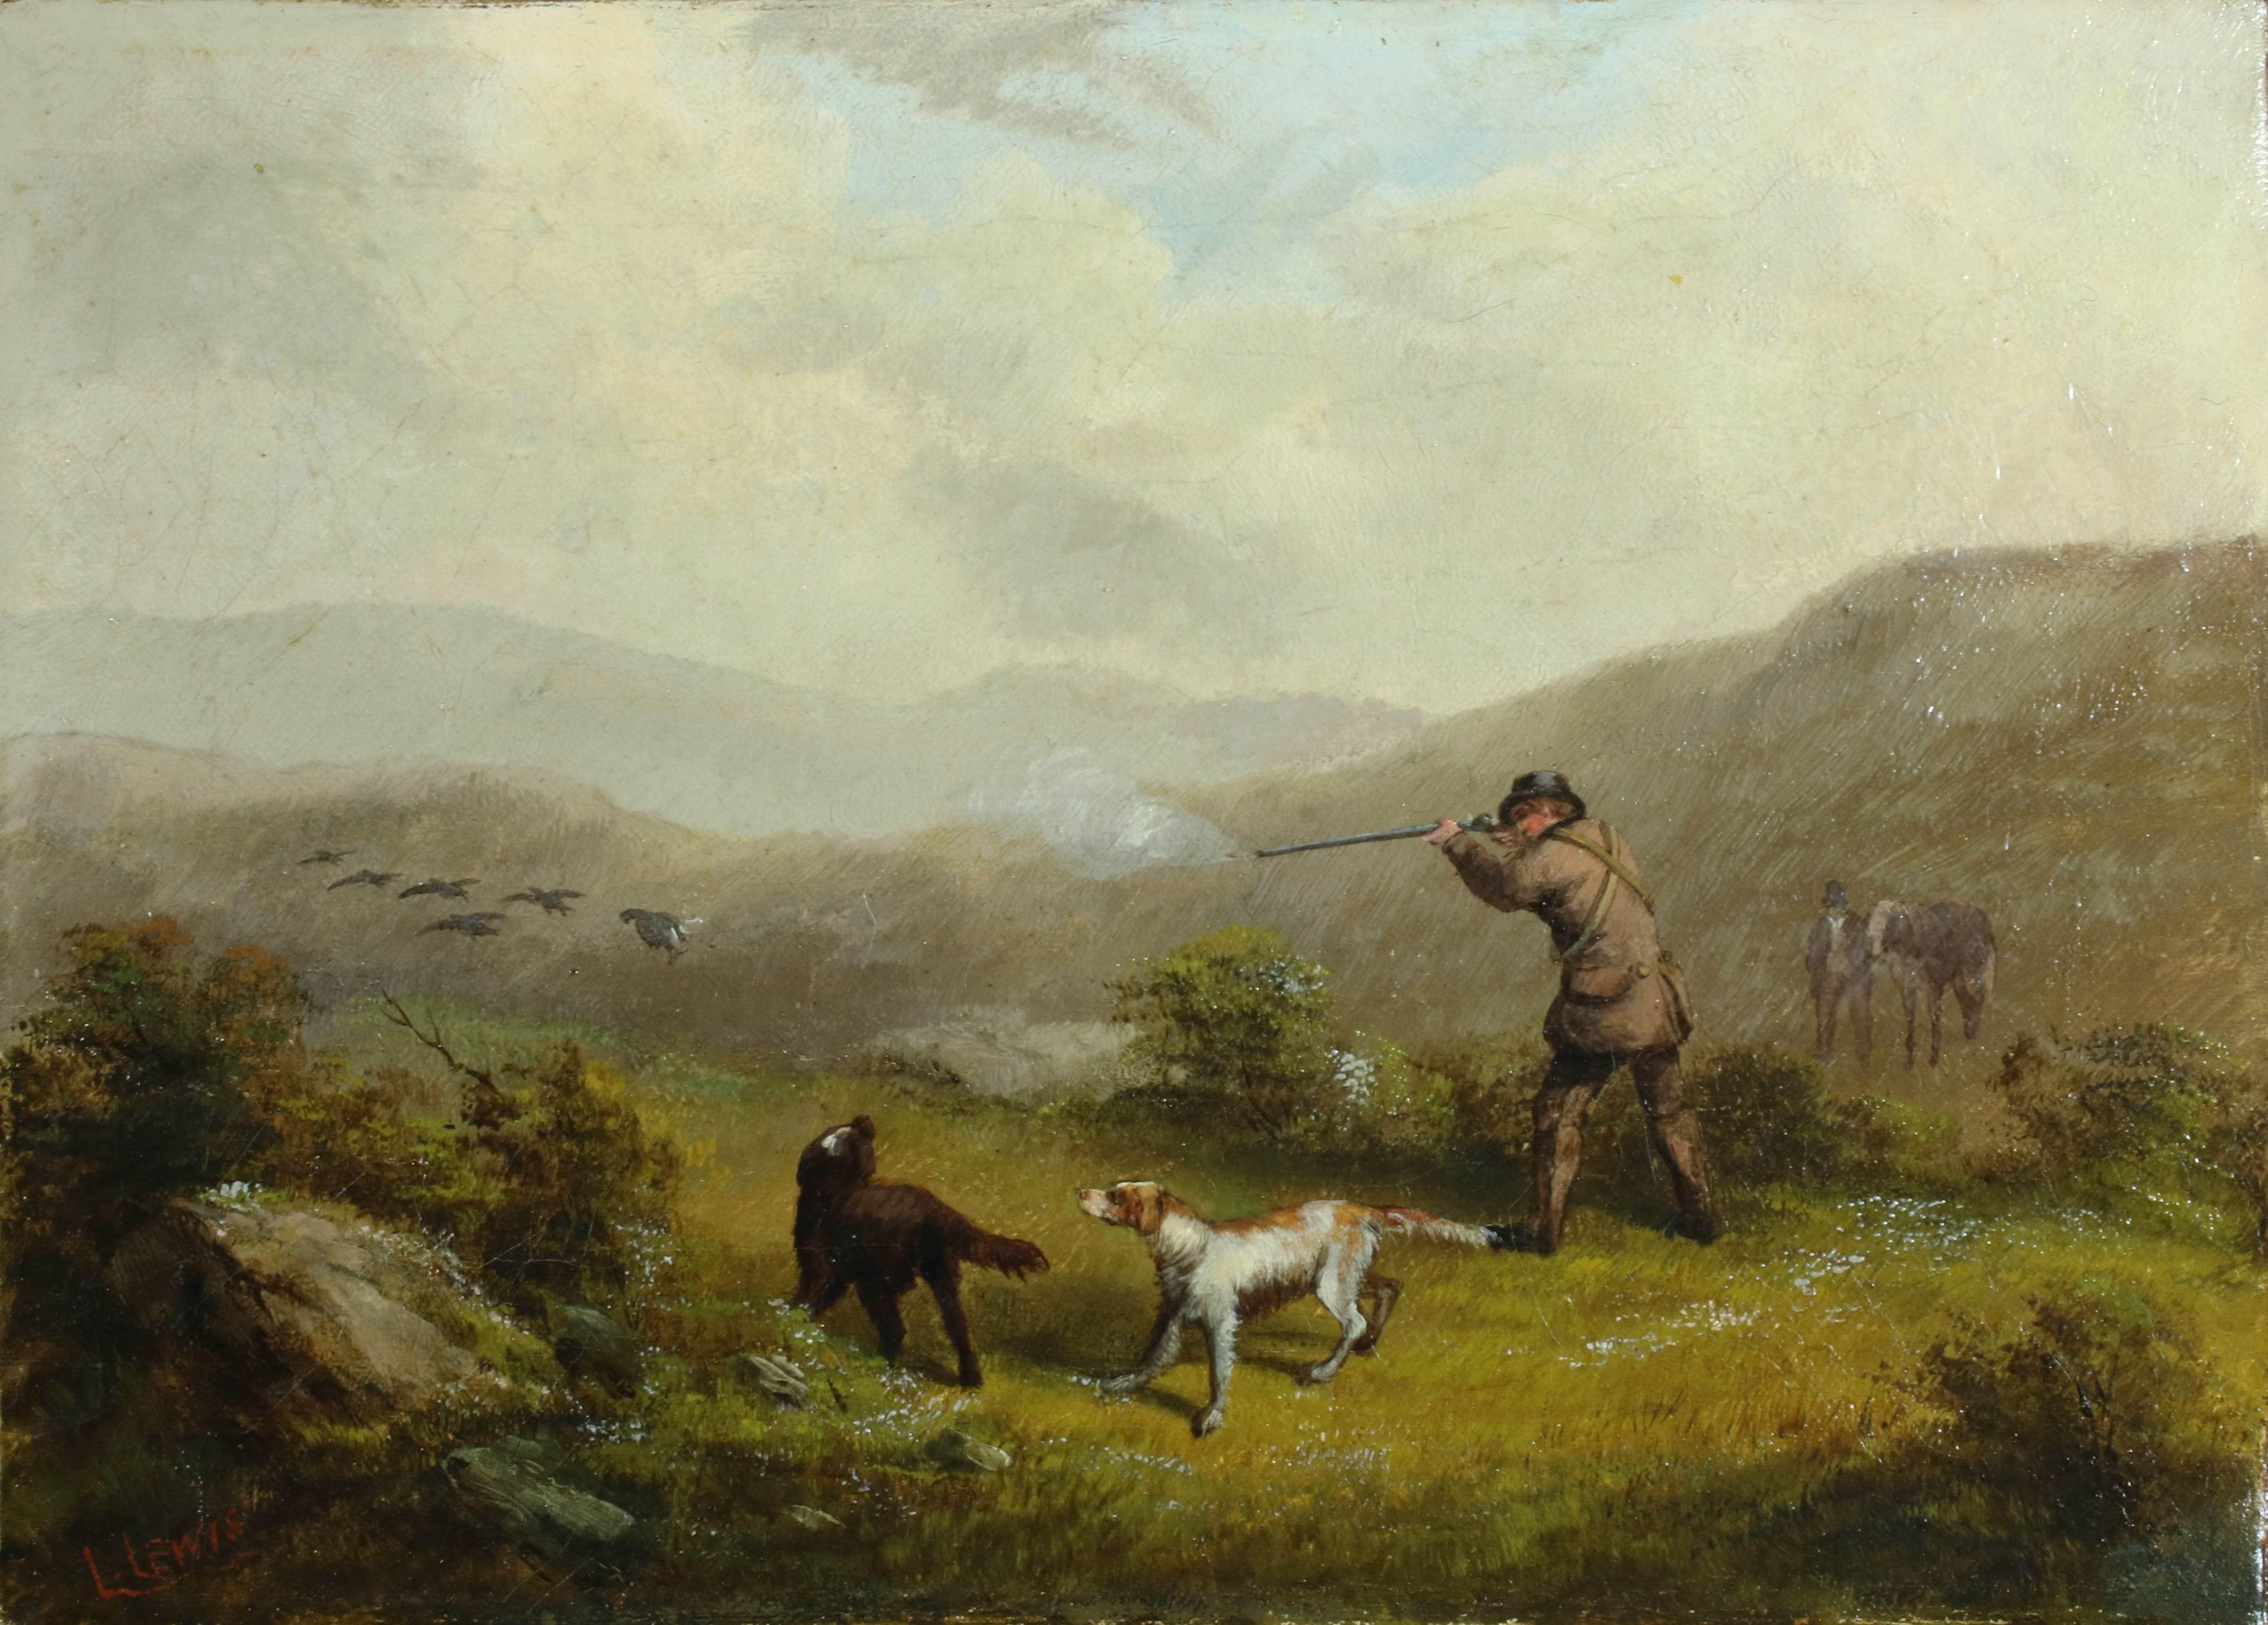 Lennard Lewis Animal Painting – The Grouse Shoot Gun with Dogs and grouse in hilly landscape, Öl, 19. Jahrhundert, Gun with Dogs and grouse 